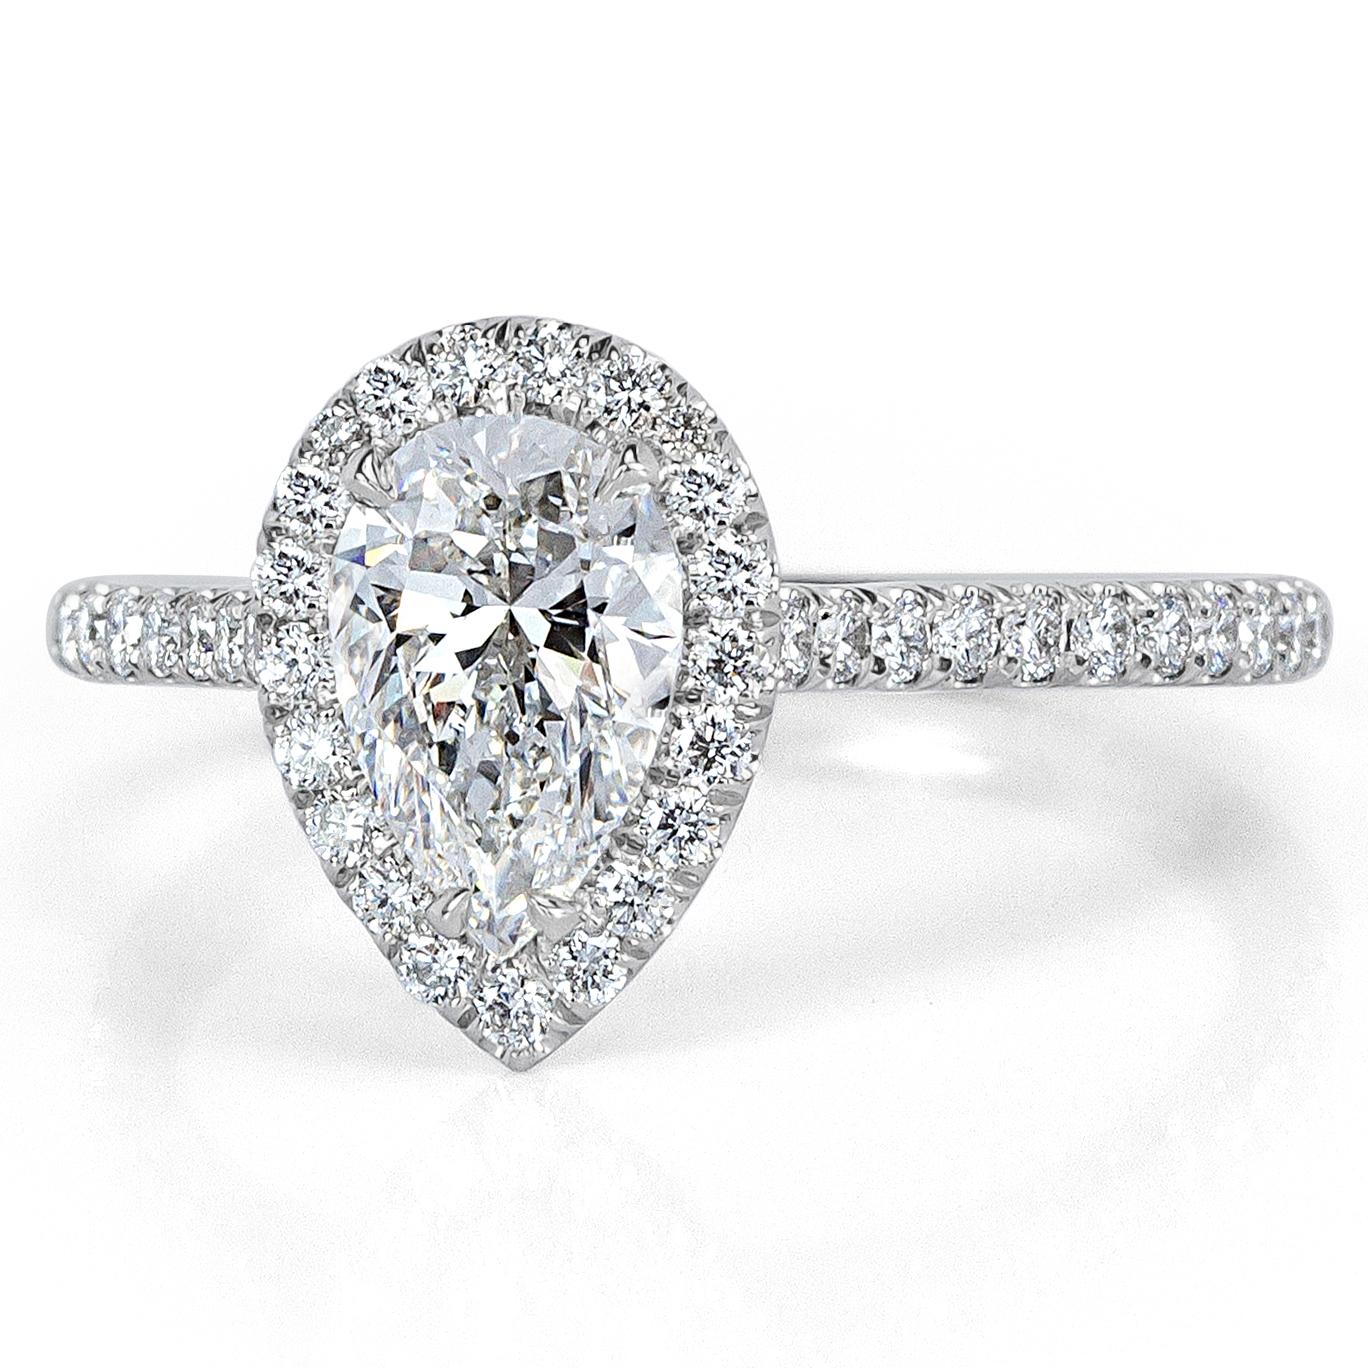 Created in our custom micro pavé setting style, this ravishing diamond engagement ring showcases a gorgeous 1.00ct pear shaped center diamond, GIA certified at E in color, VS2 in clarity. It faces up incredibly white and sparkles with tremendous